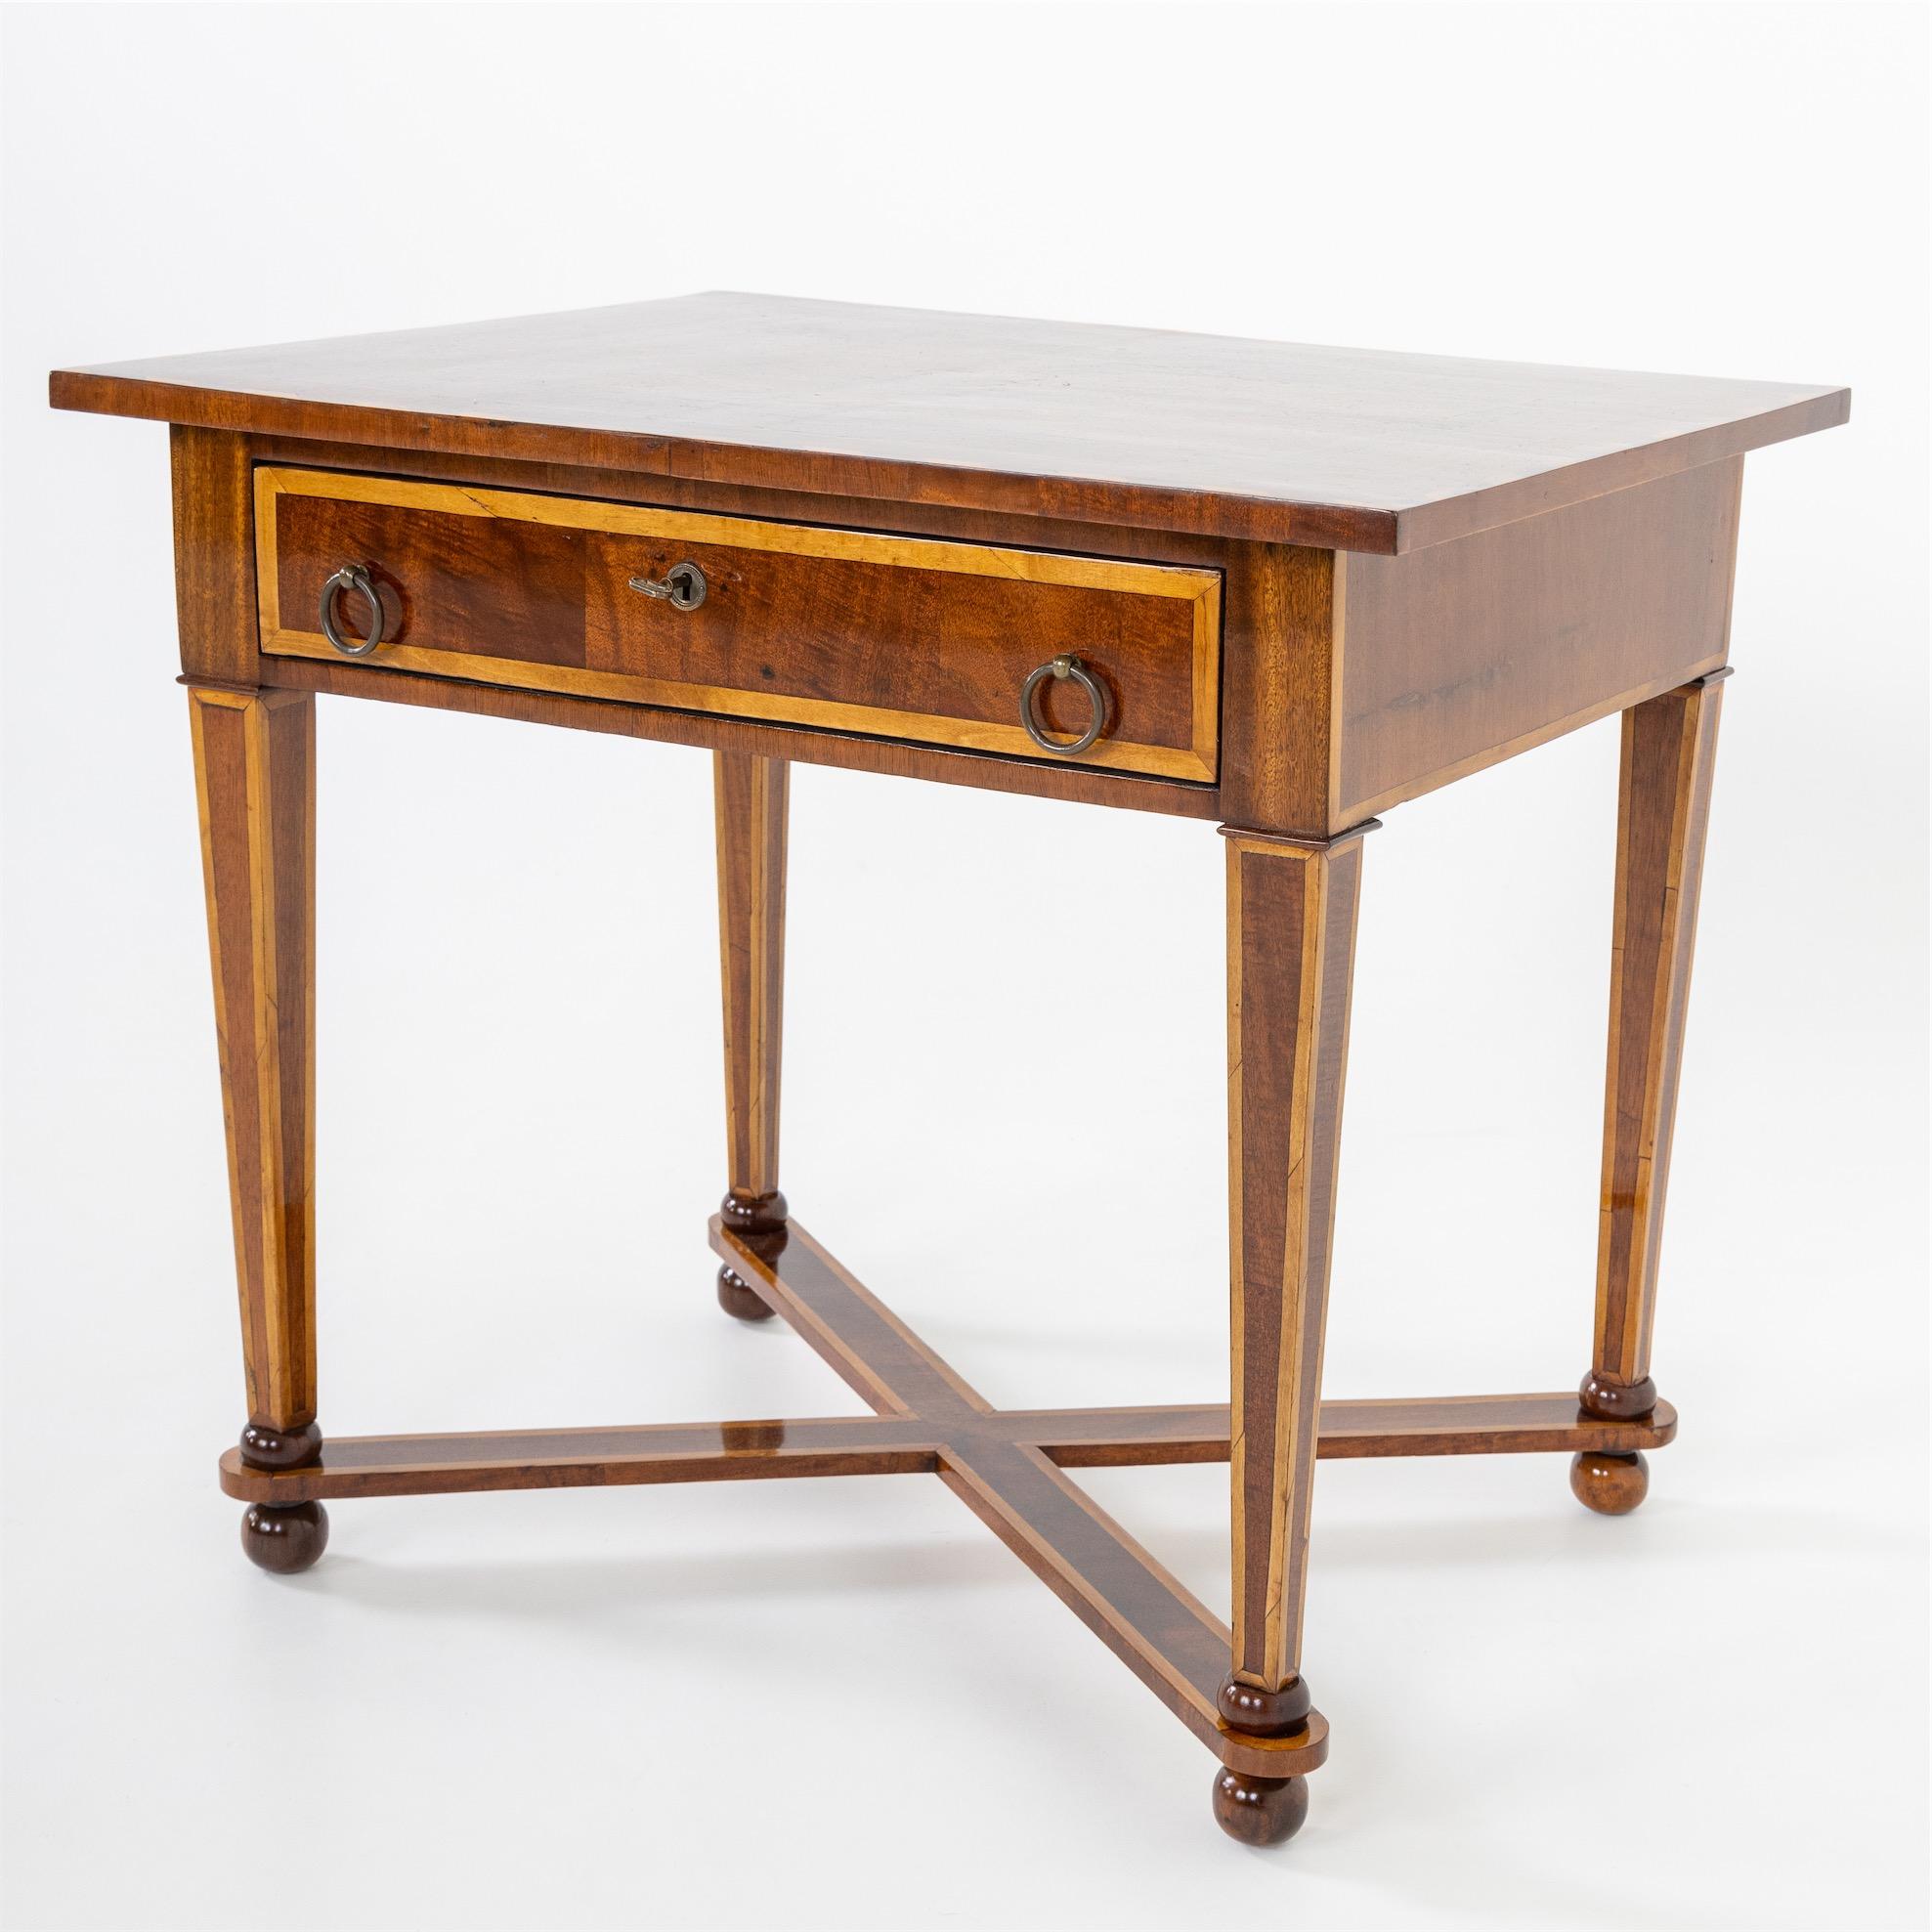 Early 19th Century Table, France, circa 1800